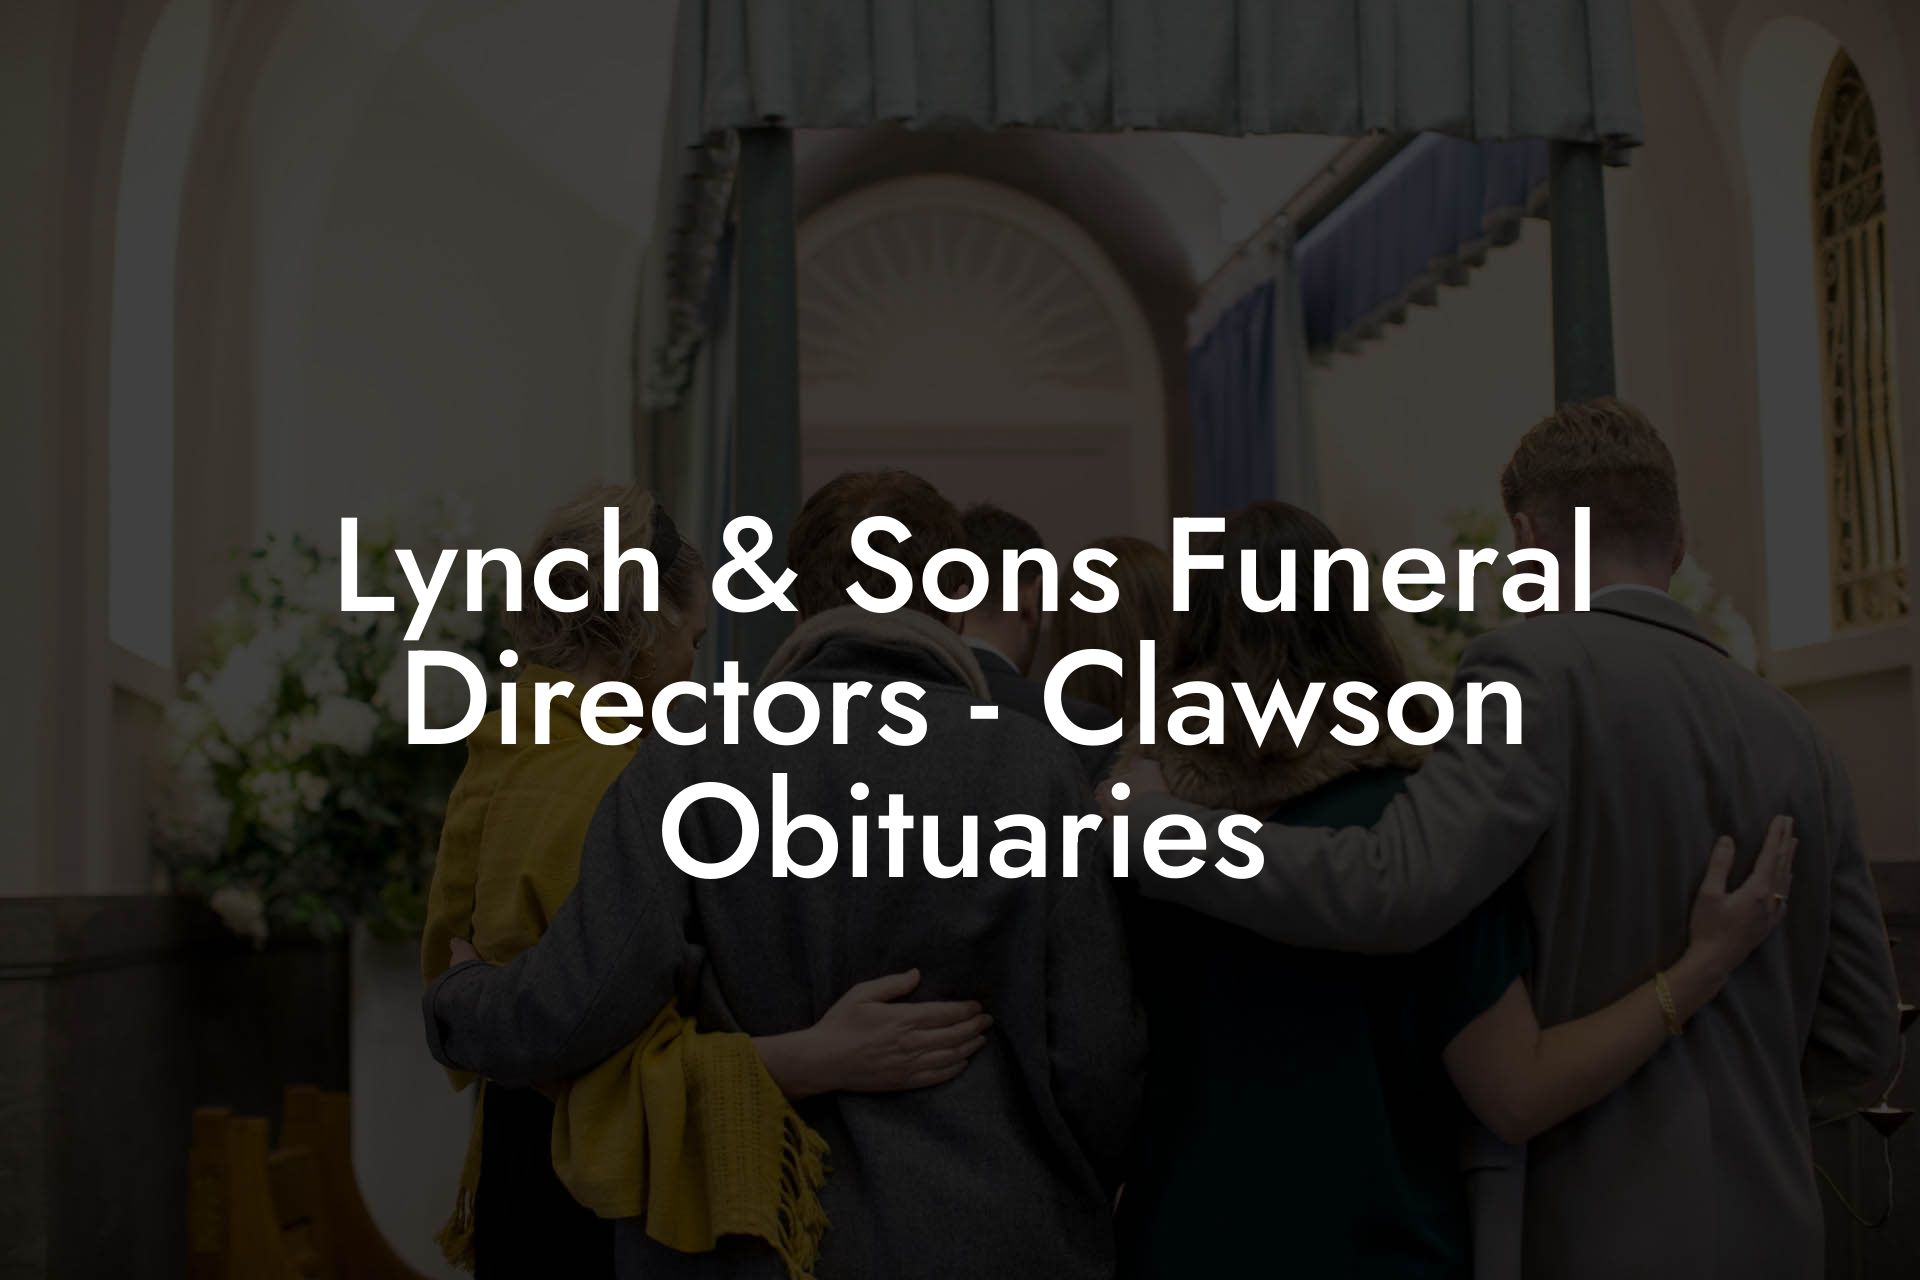 Lynch & Sons Funeral Directors - Clawson Obituaries